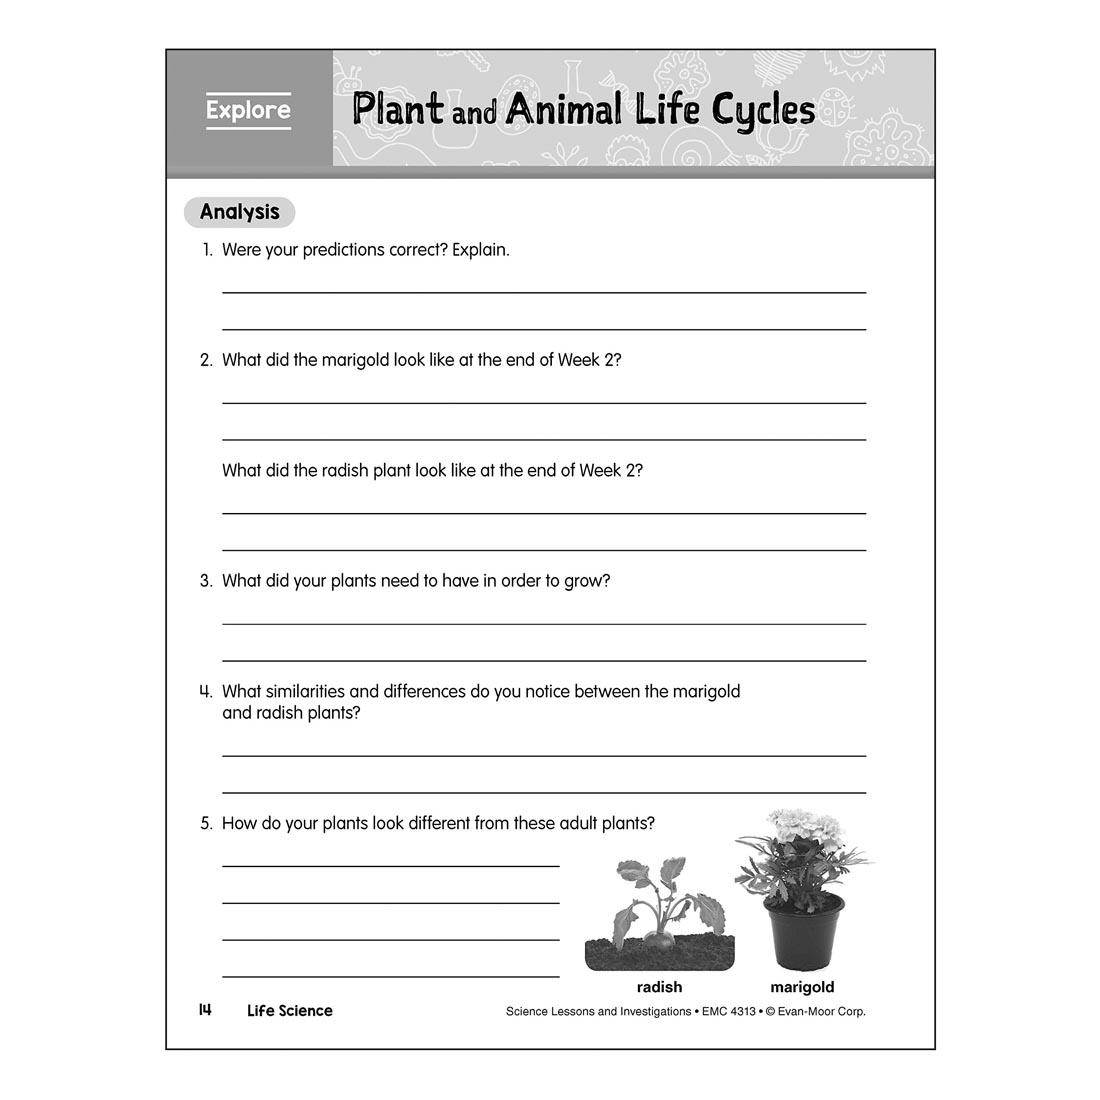 Plant and Animal Life Cycles page from Evan-Moor Science Lessons & Investigations Grade 3